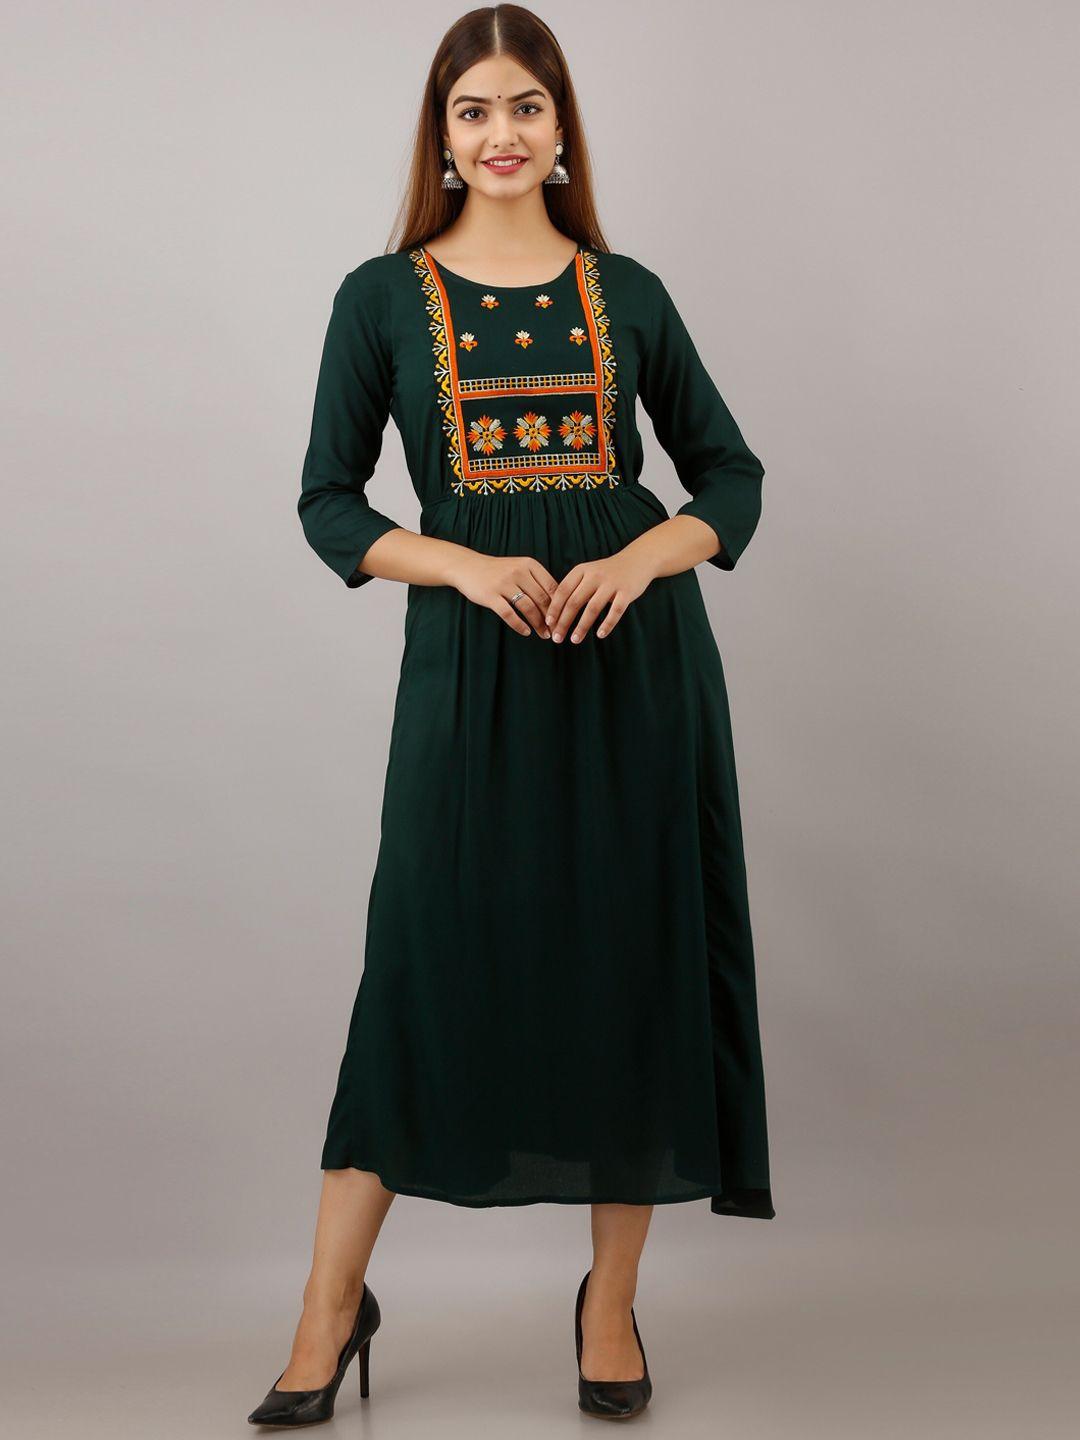 women-touch-green-&-orange-floral-embroidered-a-line-midi-dress